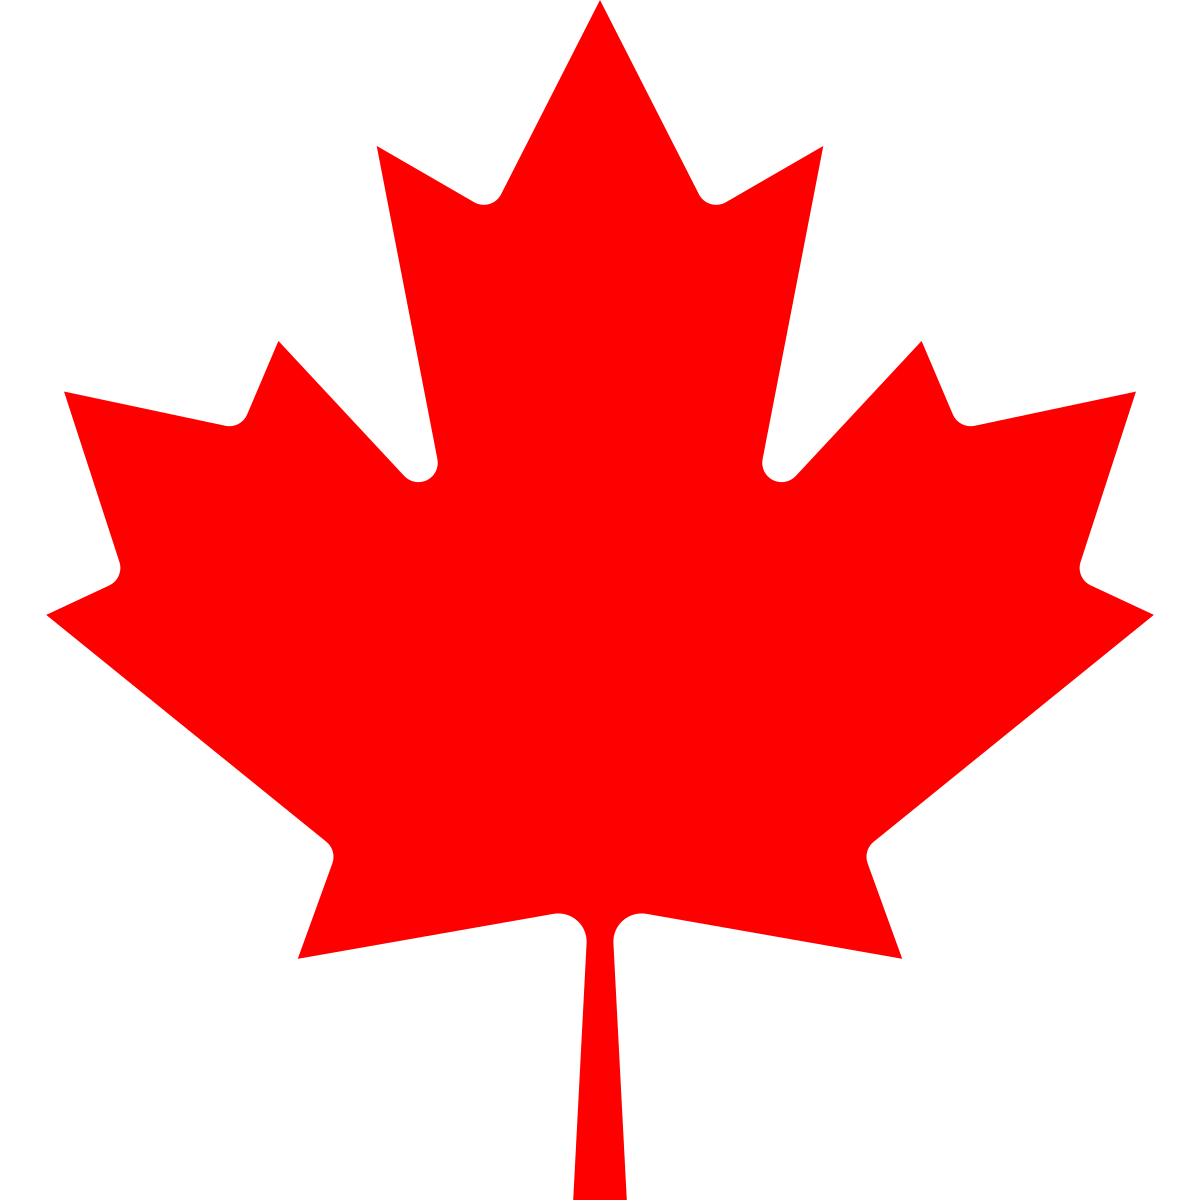 Maple leaf canada brought you by Thames International